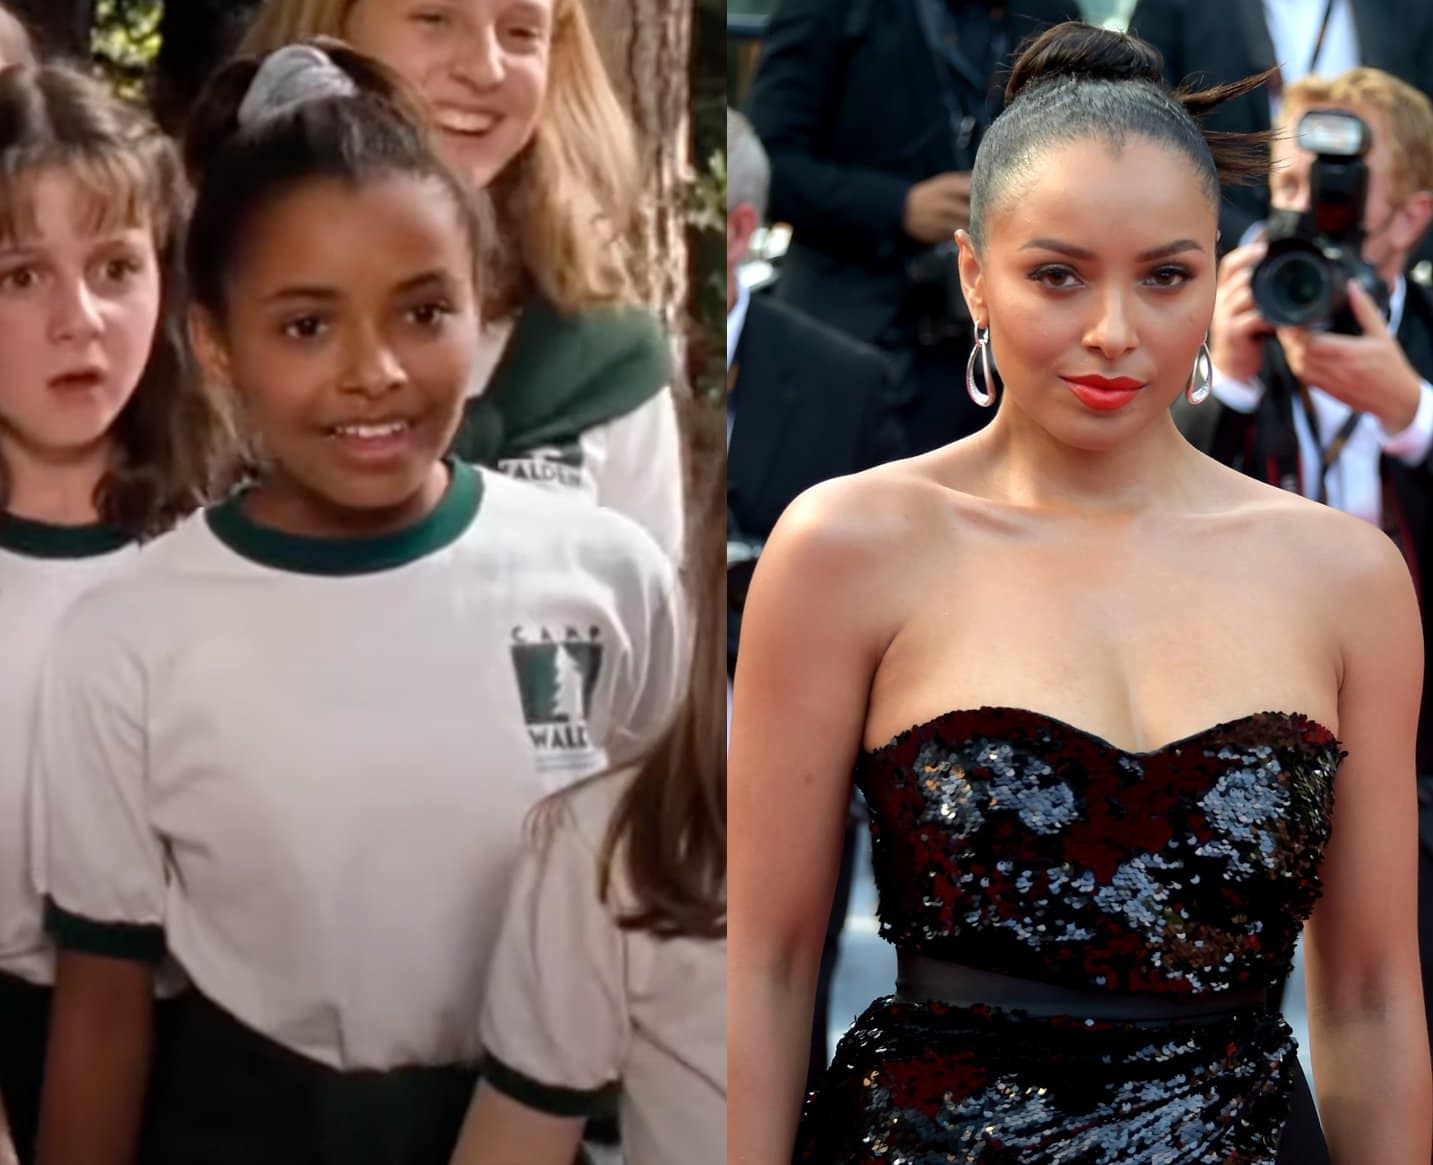 The Parent Trap, starring Lindsay Lohan, was Kat Graham's first-ever movie appearance